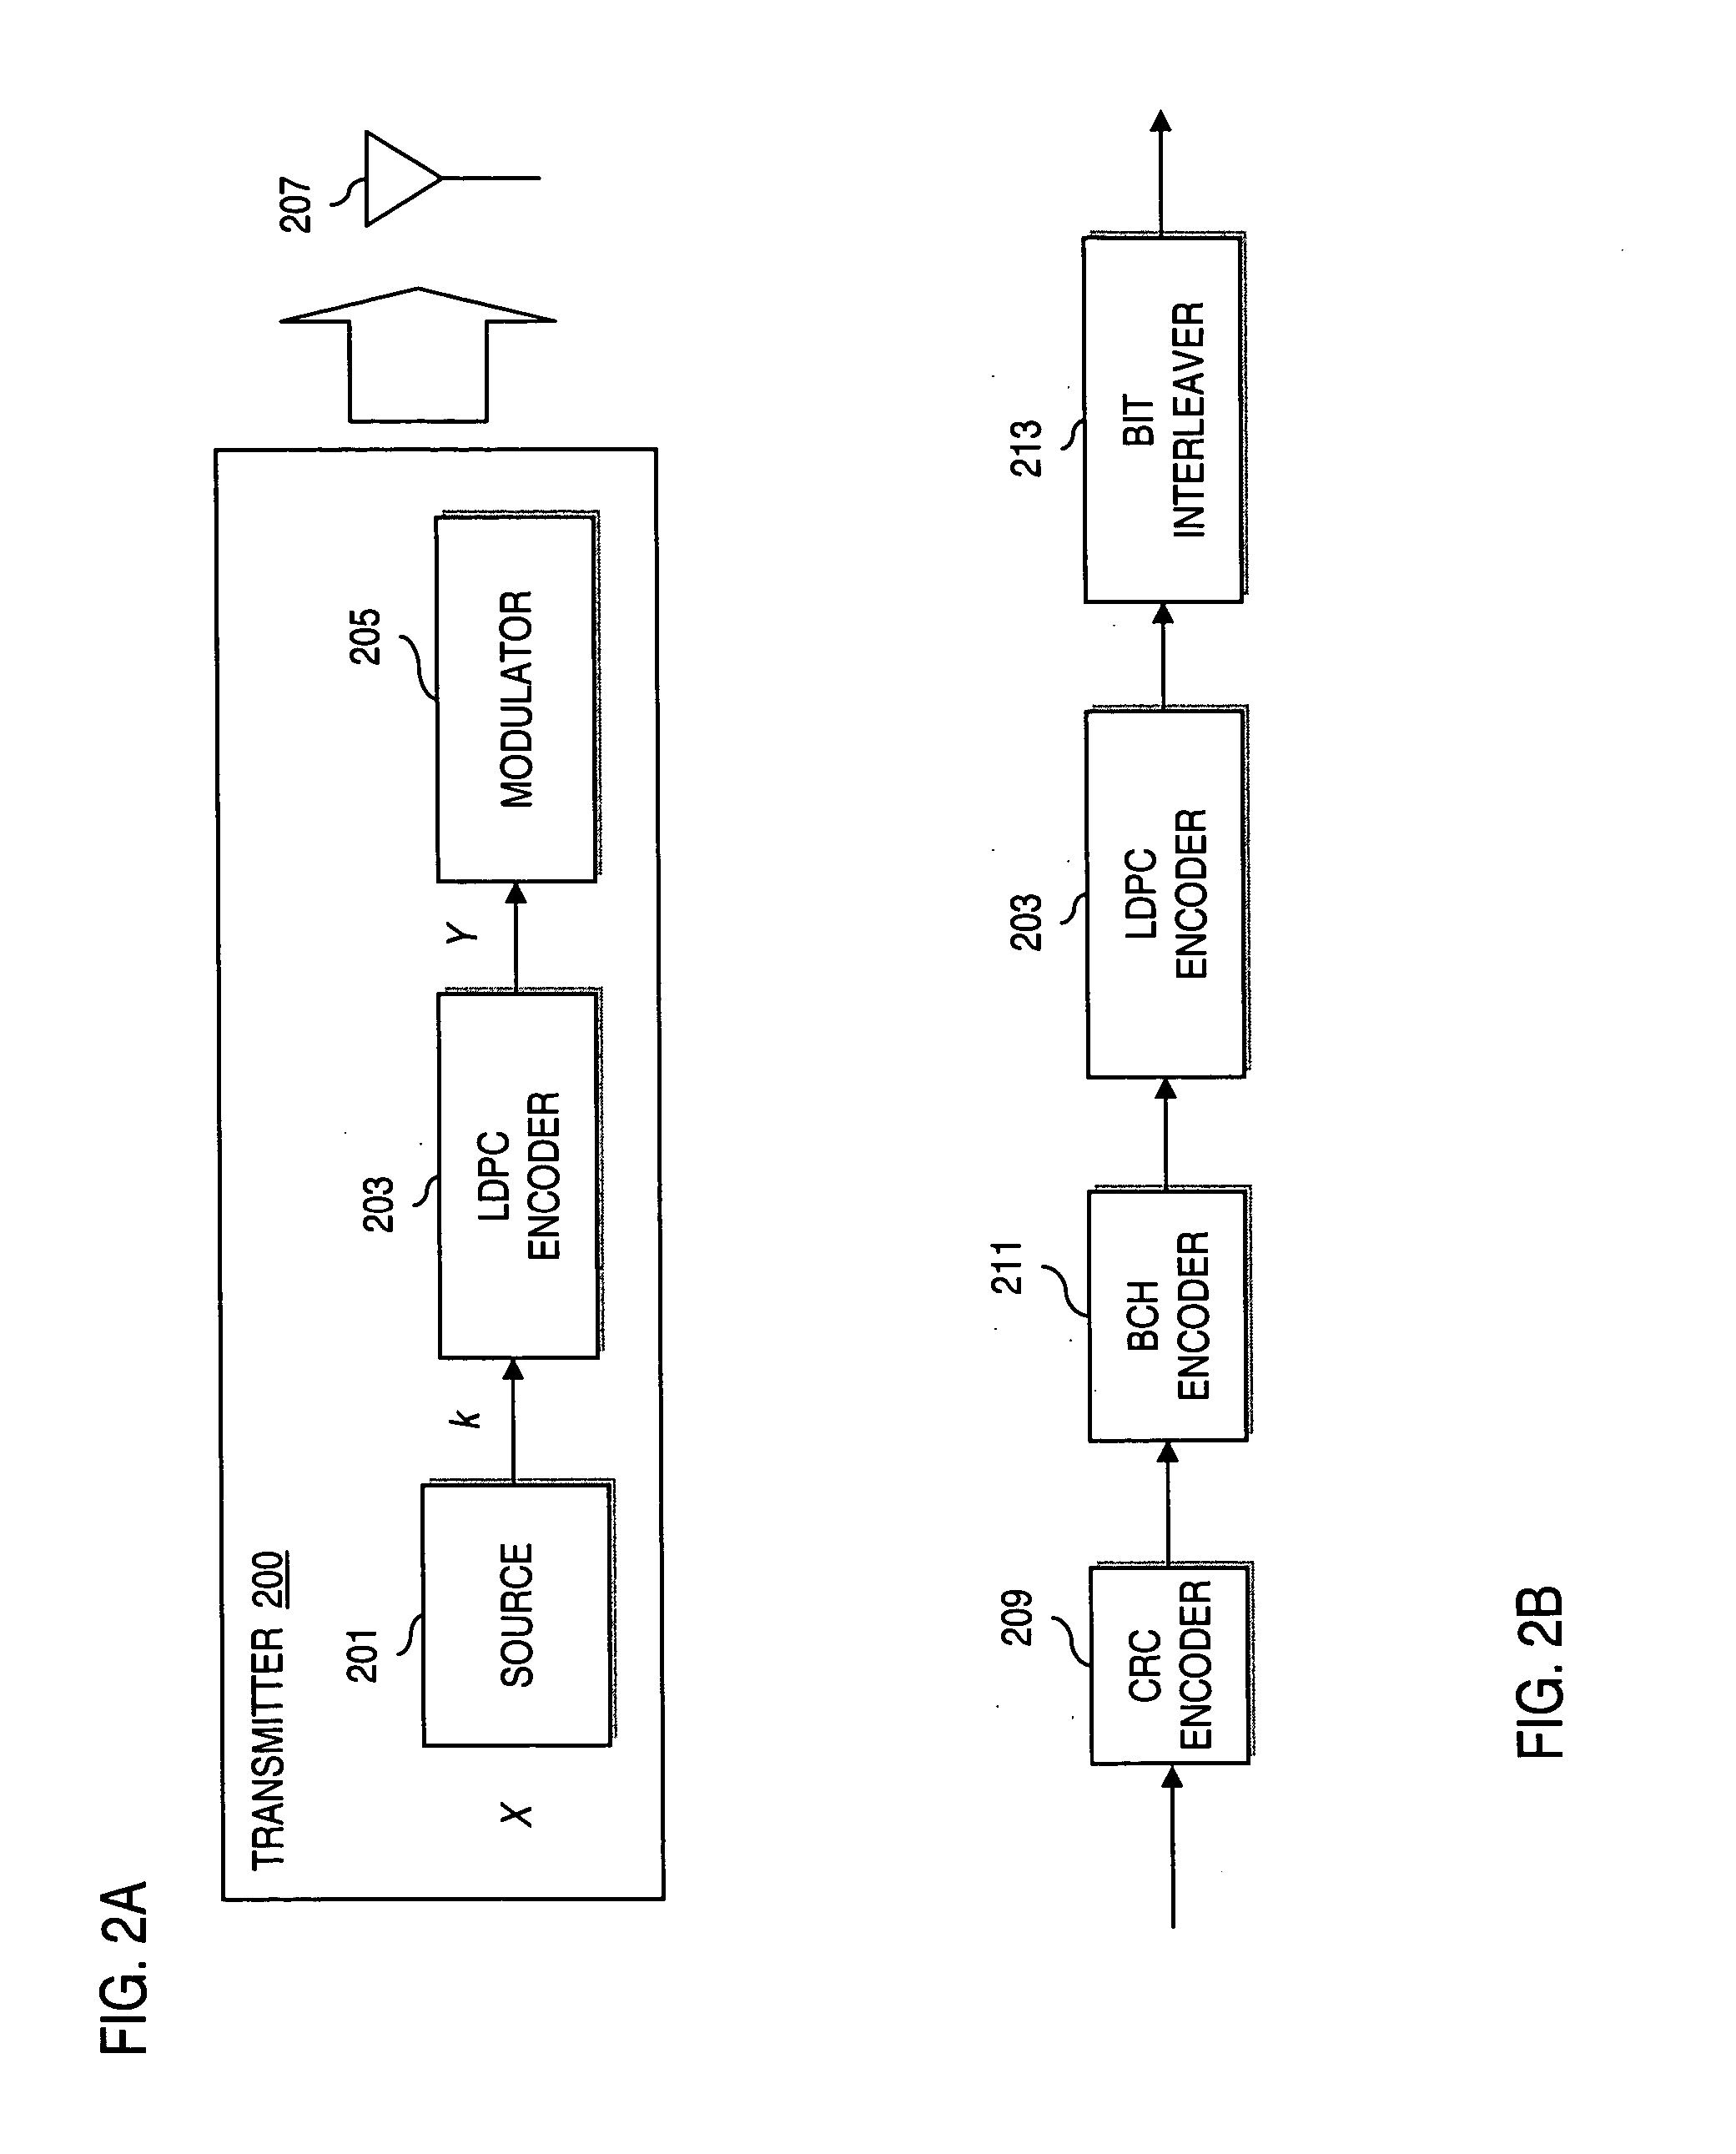 Method and system for providing short block length low density parity check (LDPC) codes